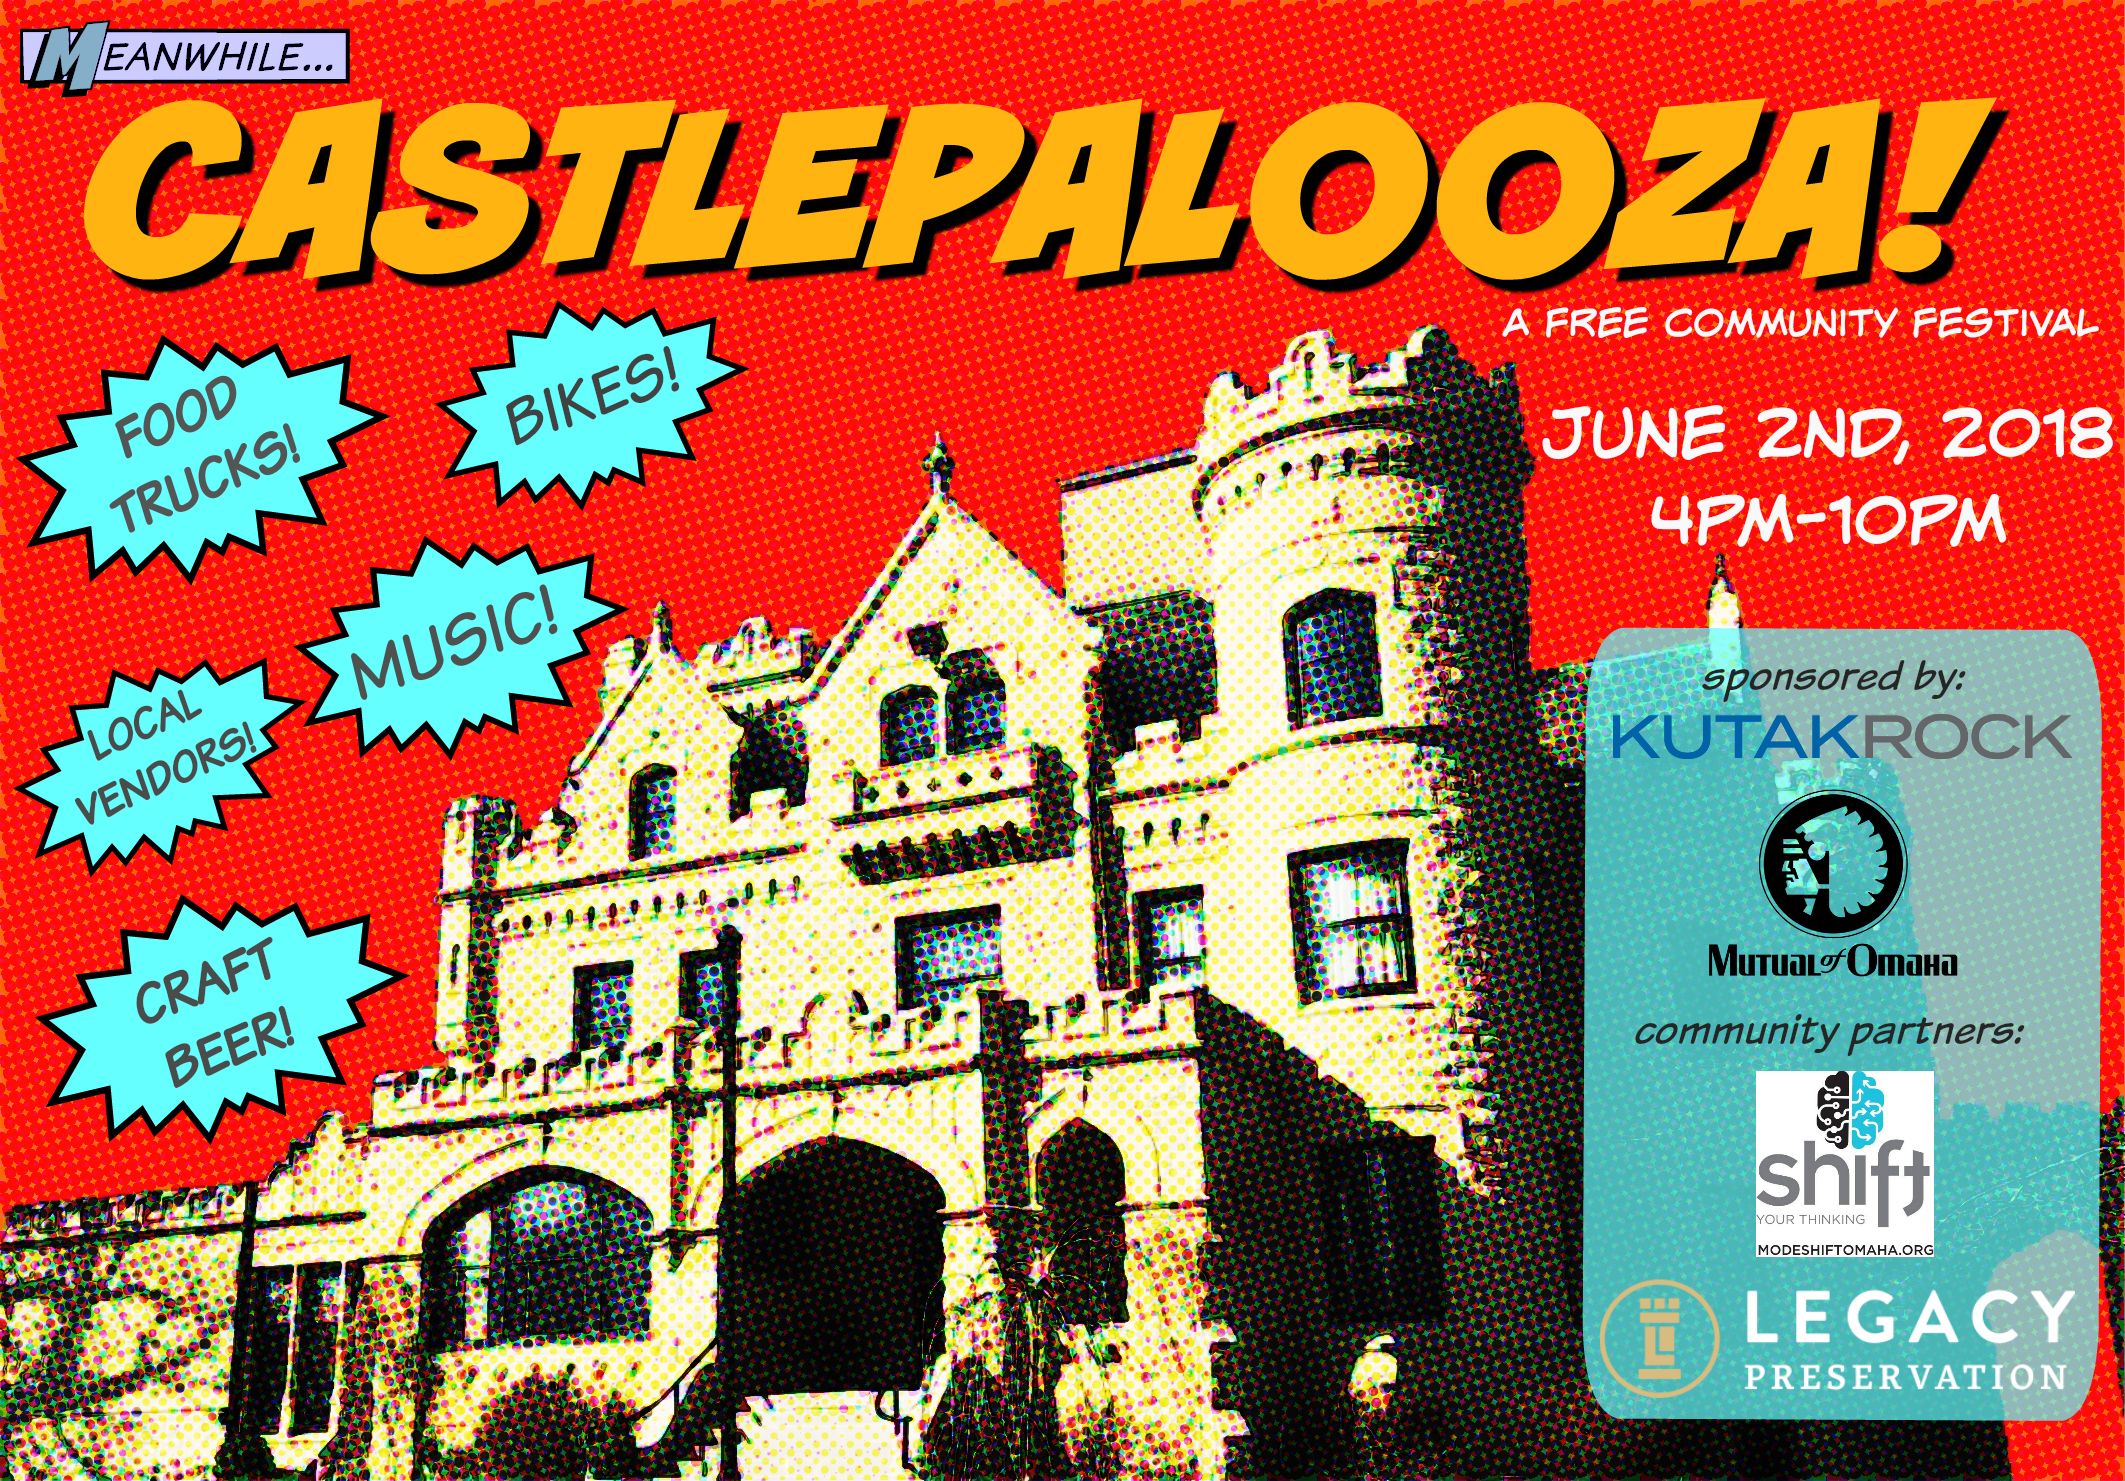 Save the Date for the First Annual Castlepalooza!